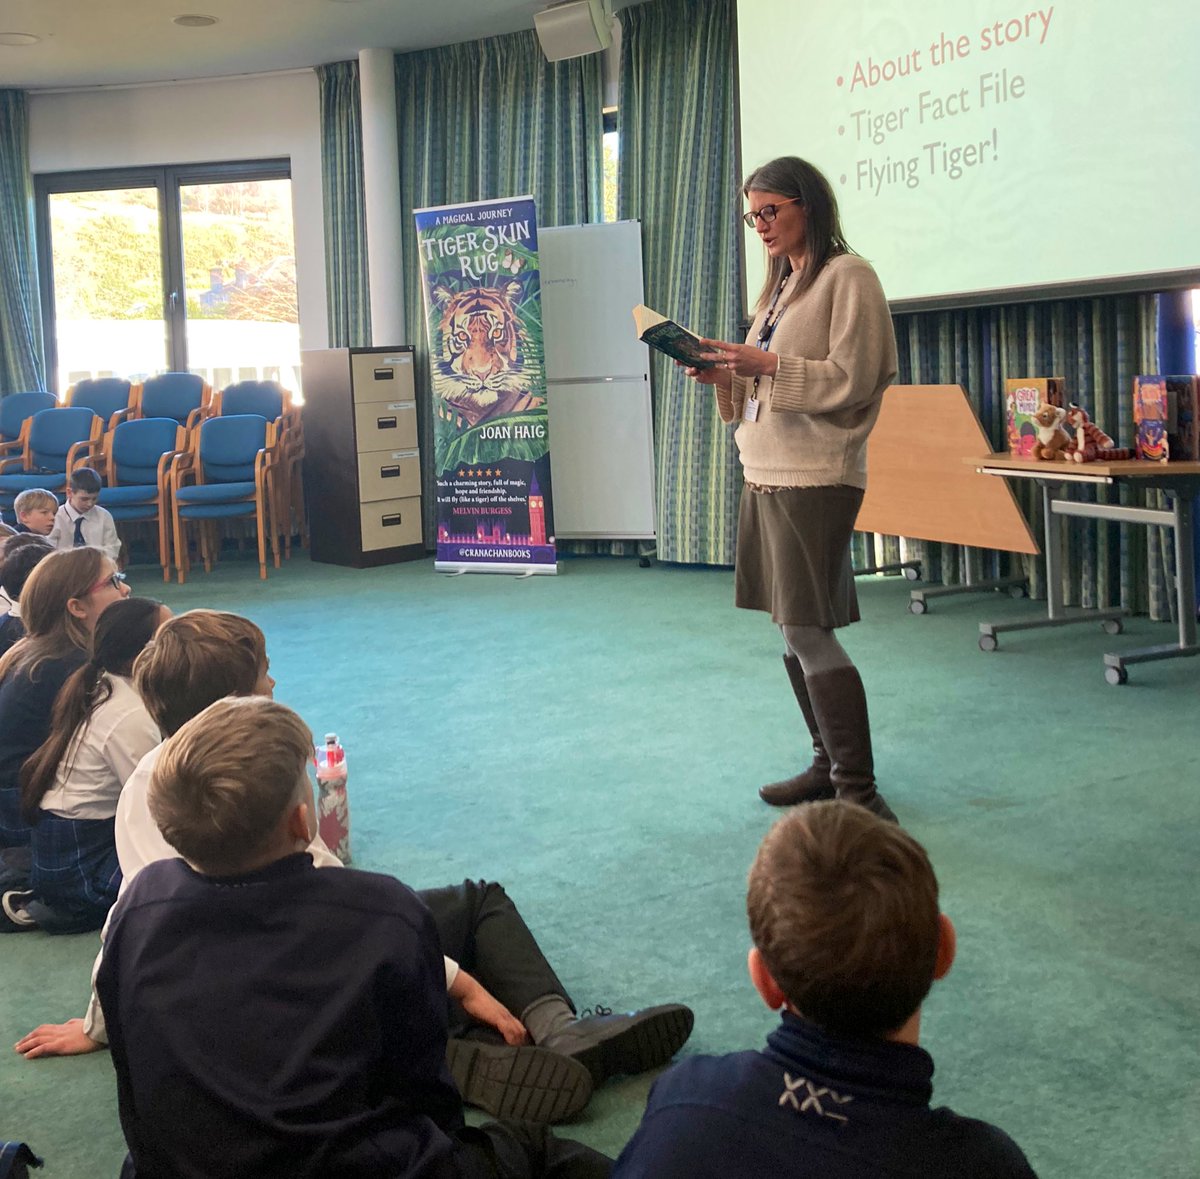 Today I went back to my old school for the first time in 27 years… as an author 🥹So special - and my biggest audience yet (the whole Junior School!).
Thanks for everything #DollarAcademy!
#grateful #memories #authorvisit #mglit #kidlit #KidLitScot